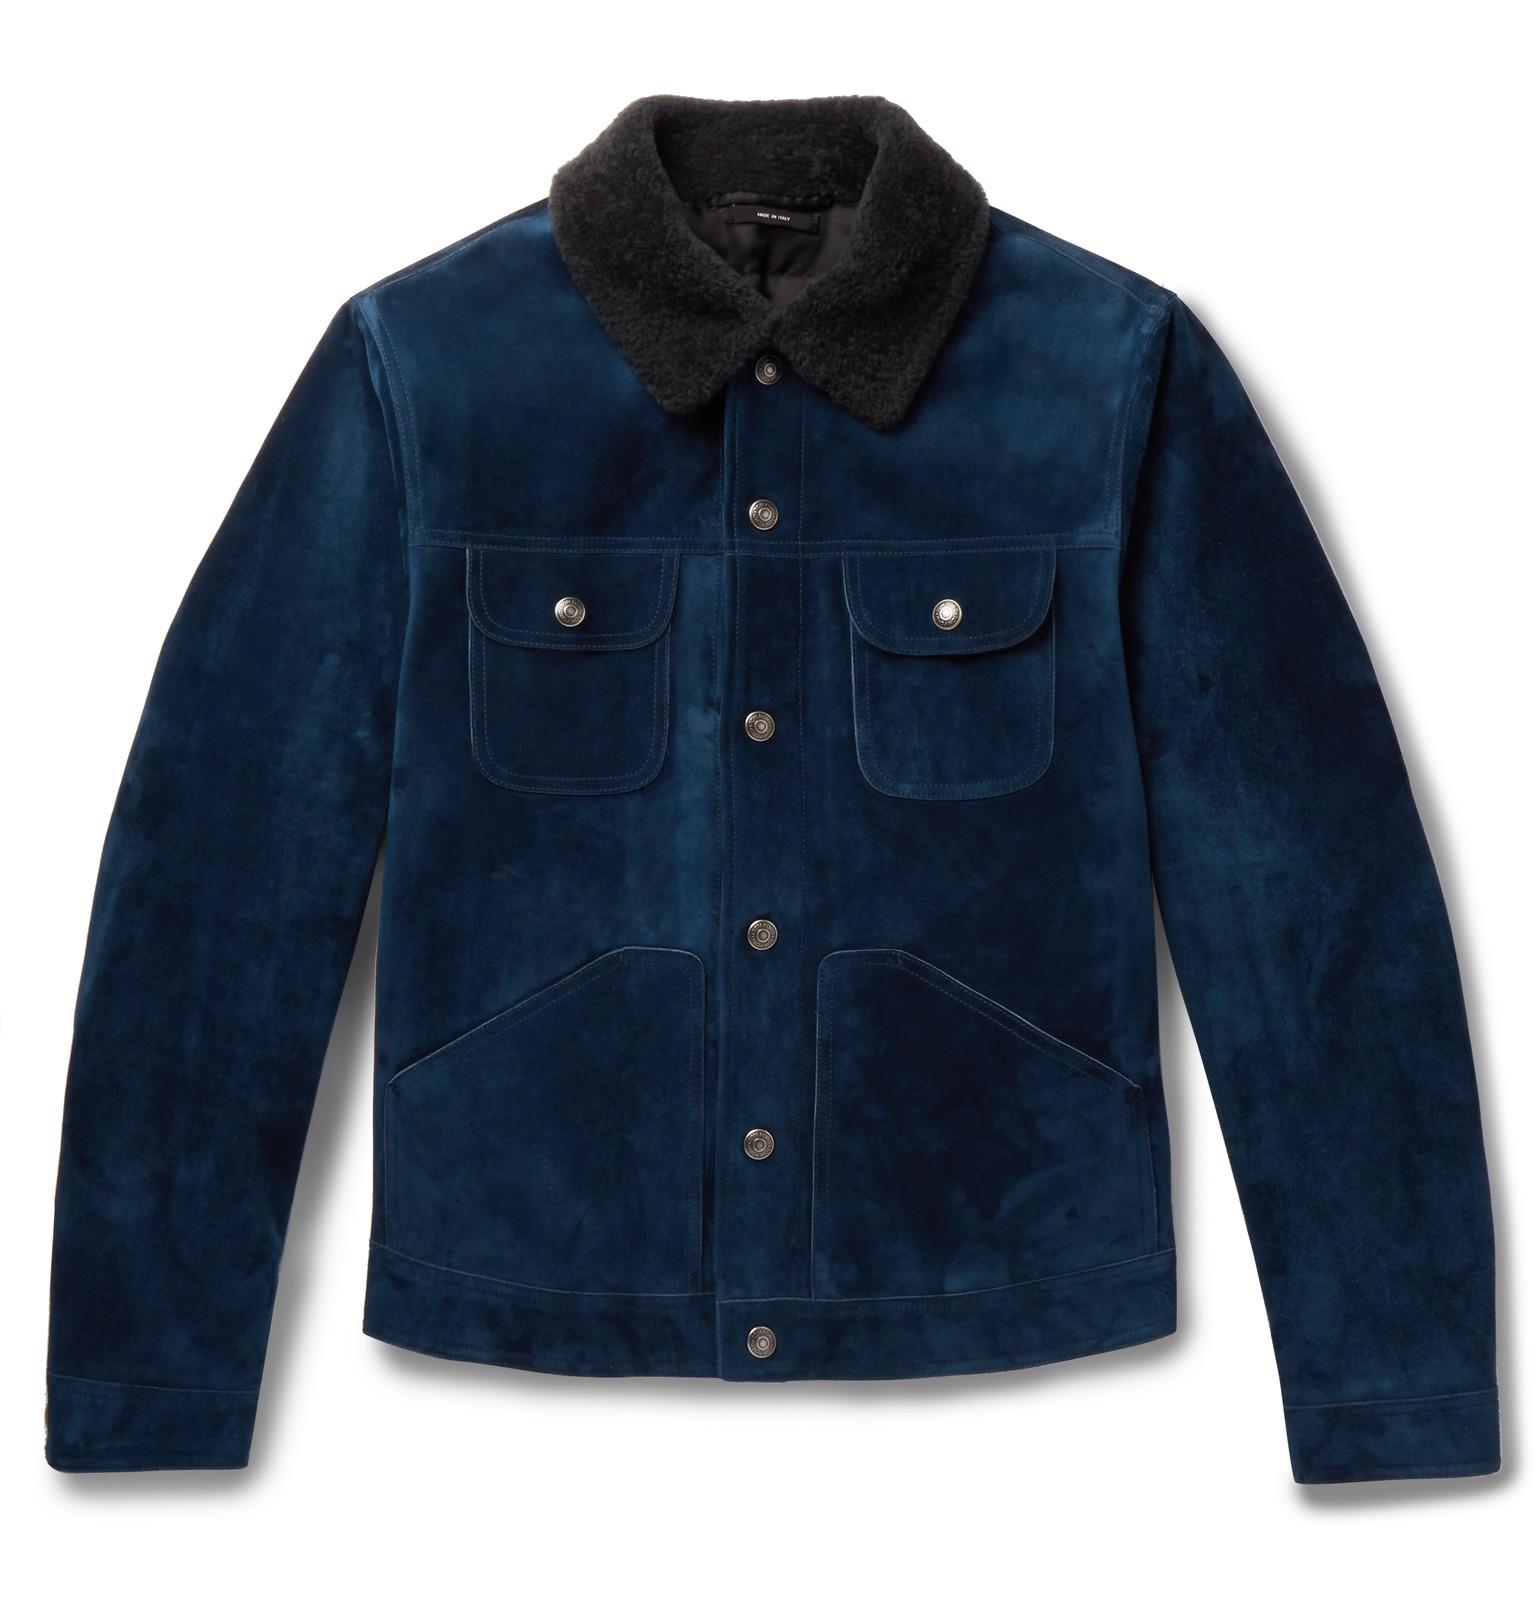 Tom Ford Suede Shearling Trucker Jacket in Blue for Men - Lyst